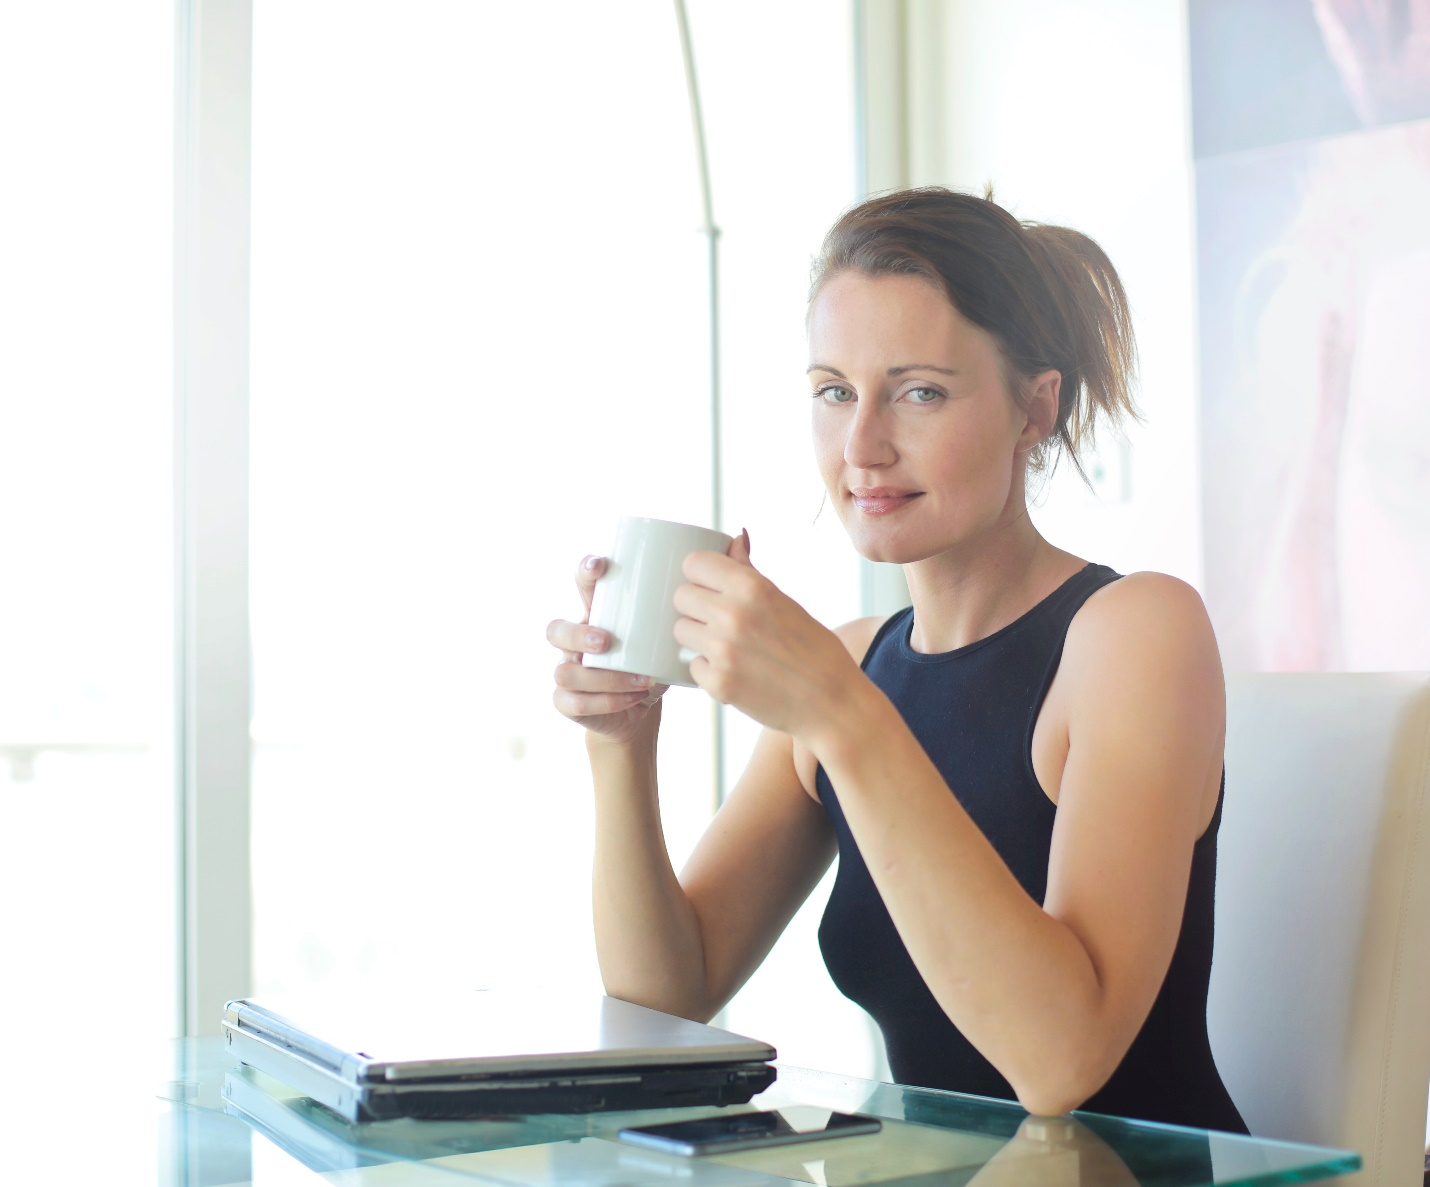 A professional woman sits at her desk with a laptop and phone holding a white mug in her hands